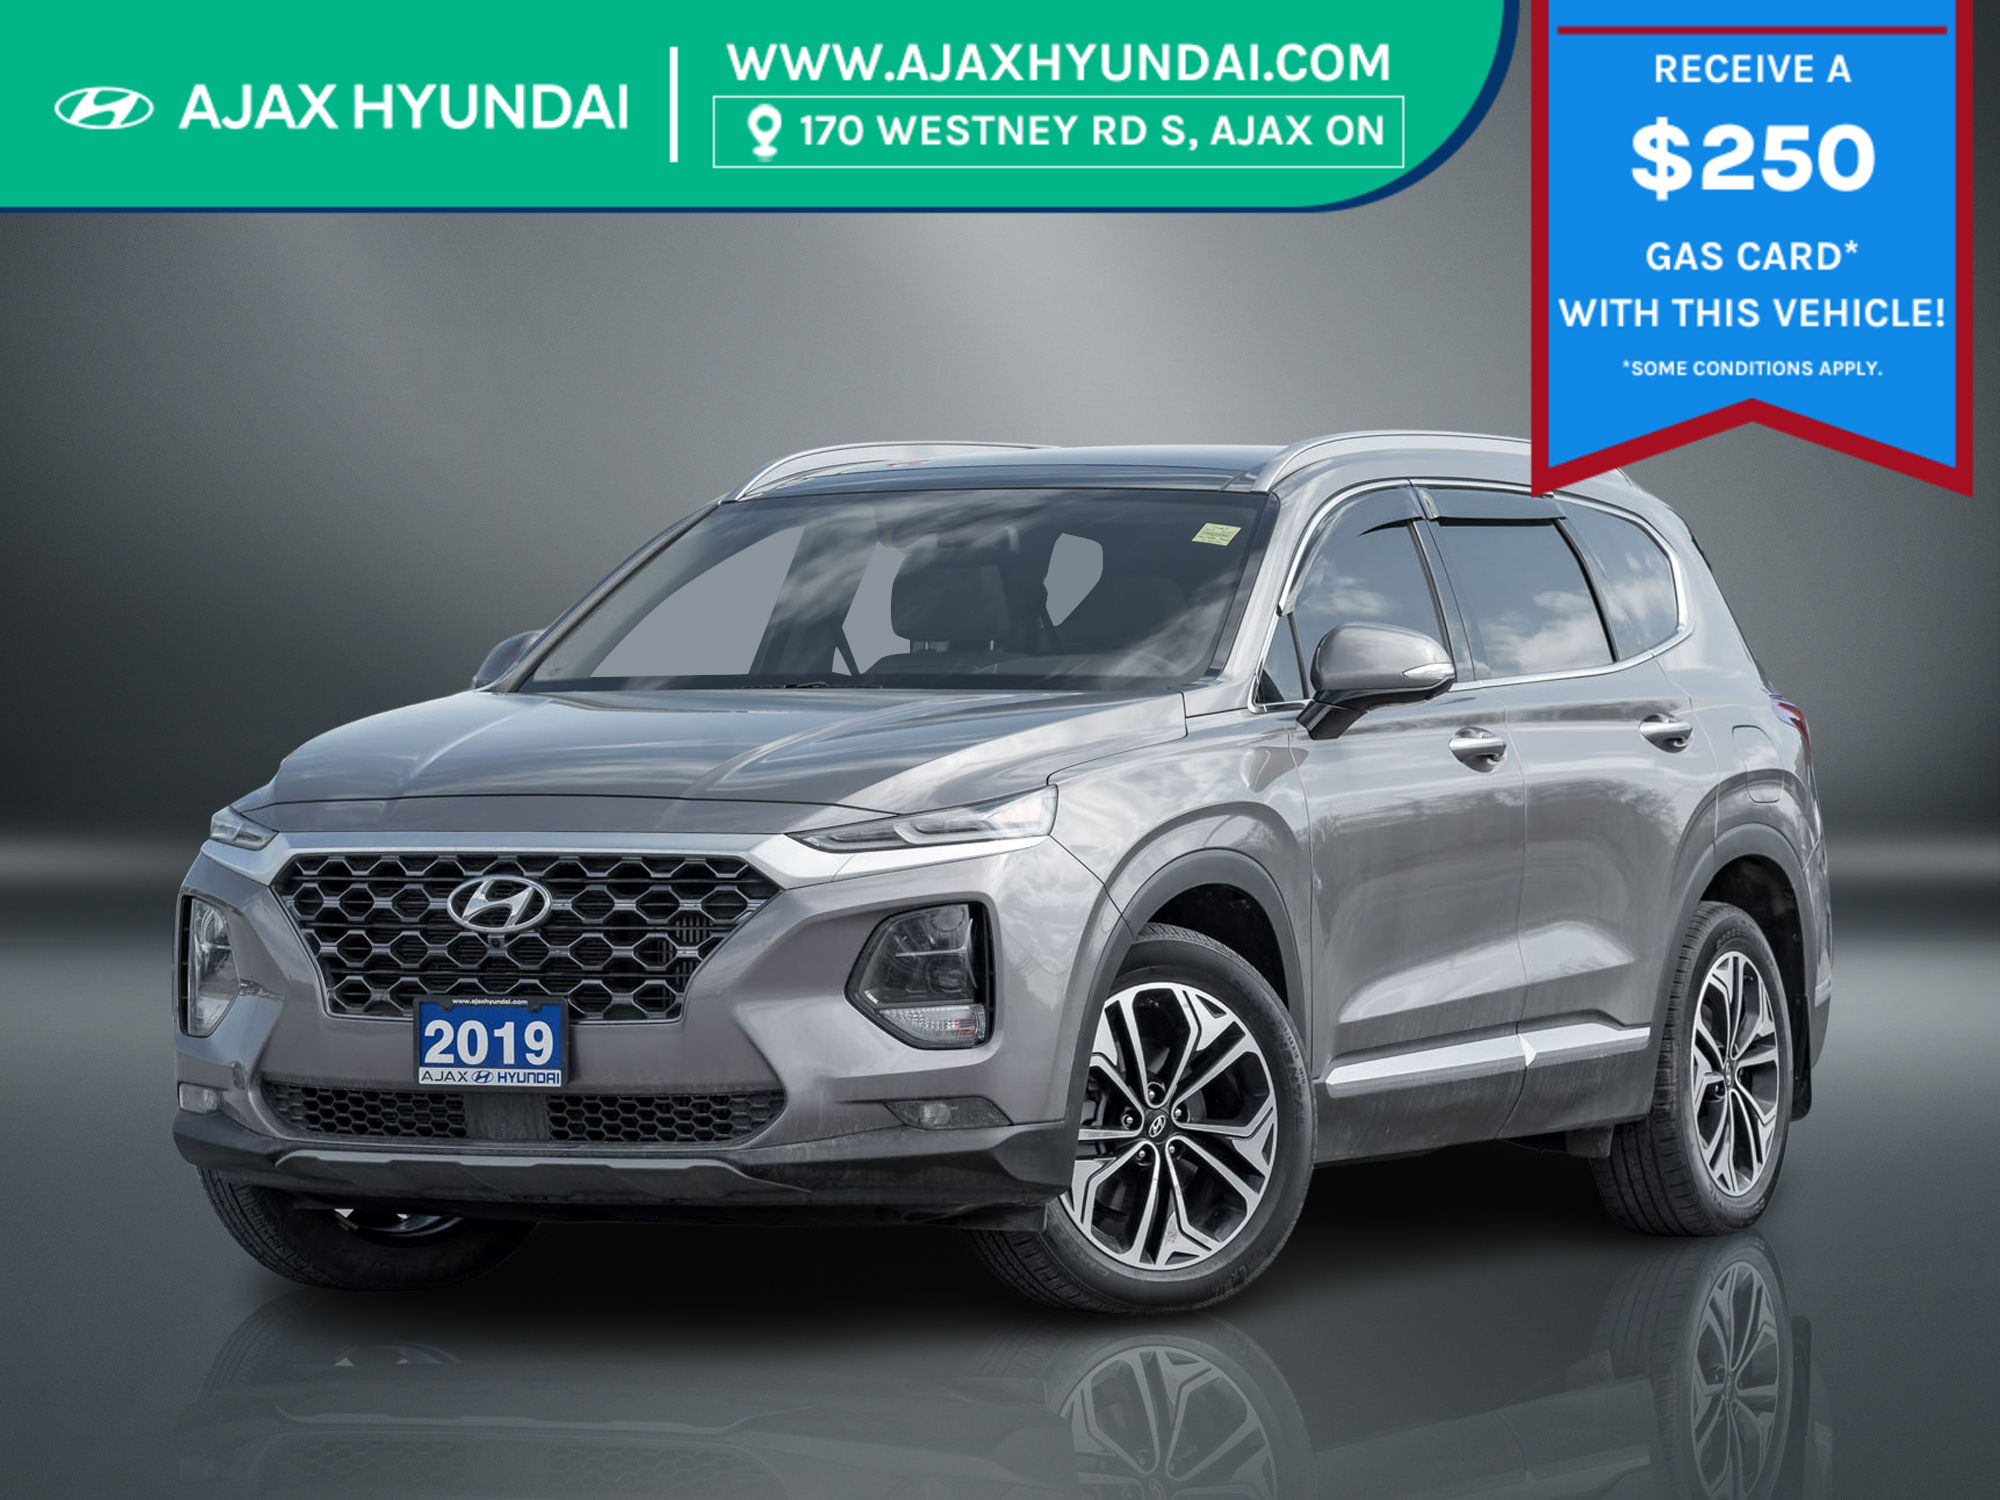 2019 Hyundai Santa Fe Ultimate 2.0 ONE OWNER | NO ACCIDENT | AWD ONE OWN